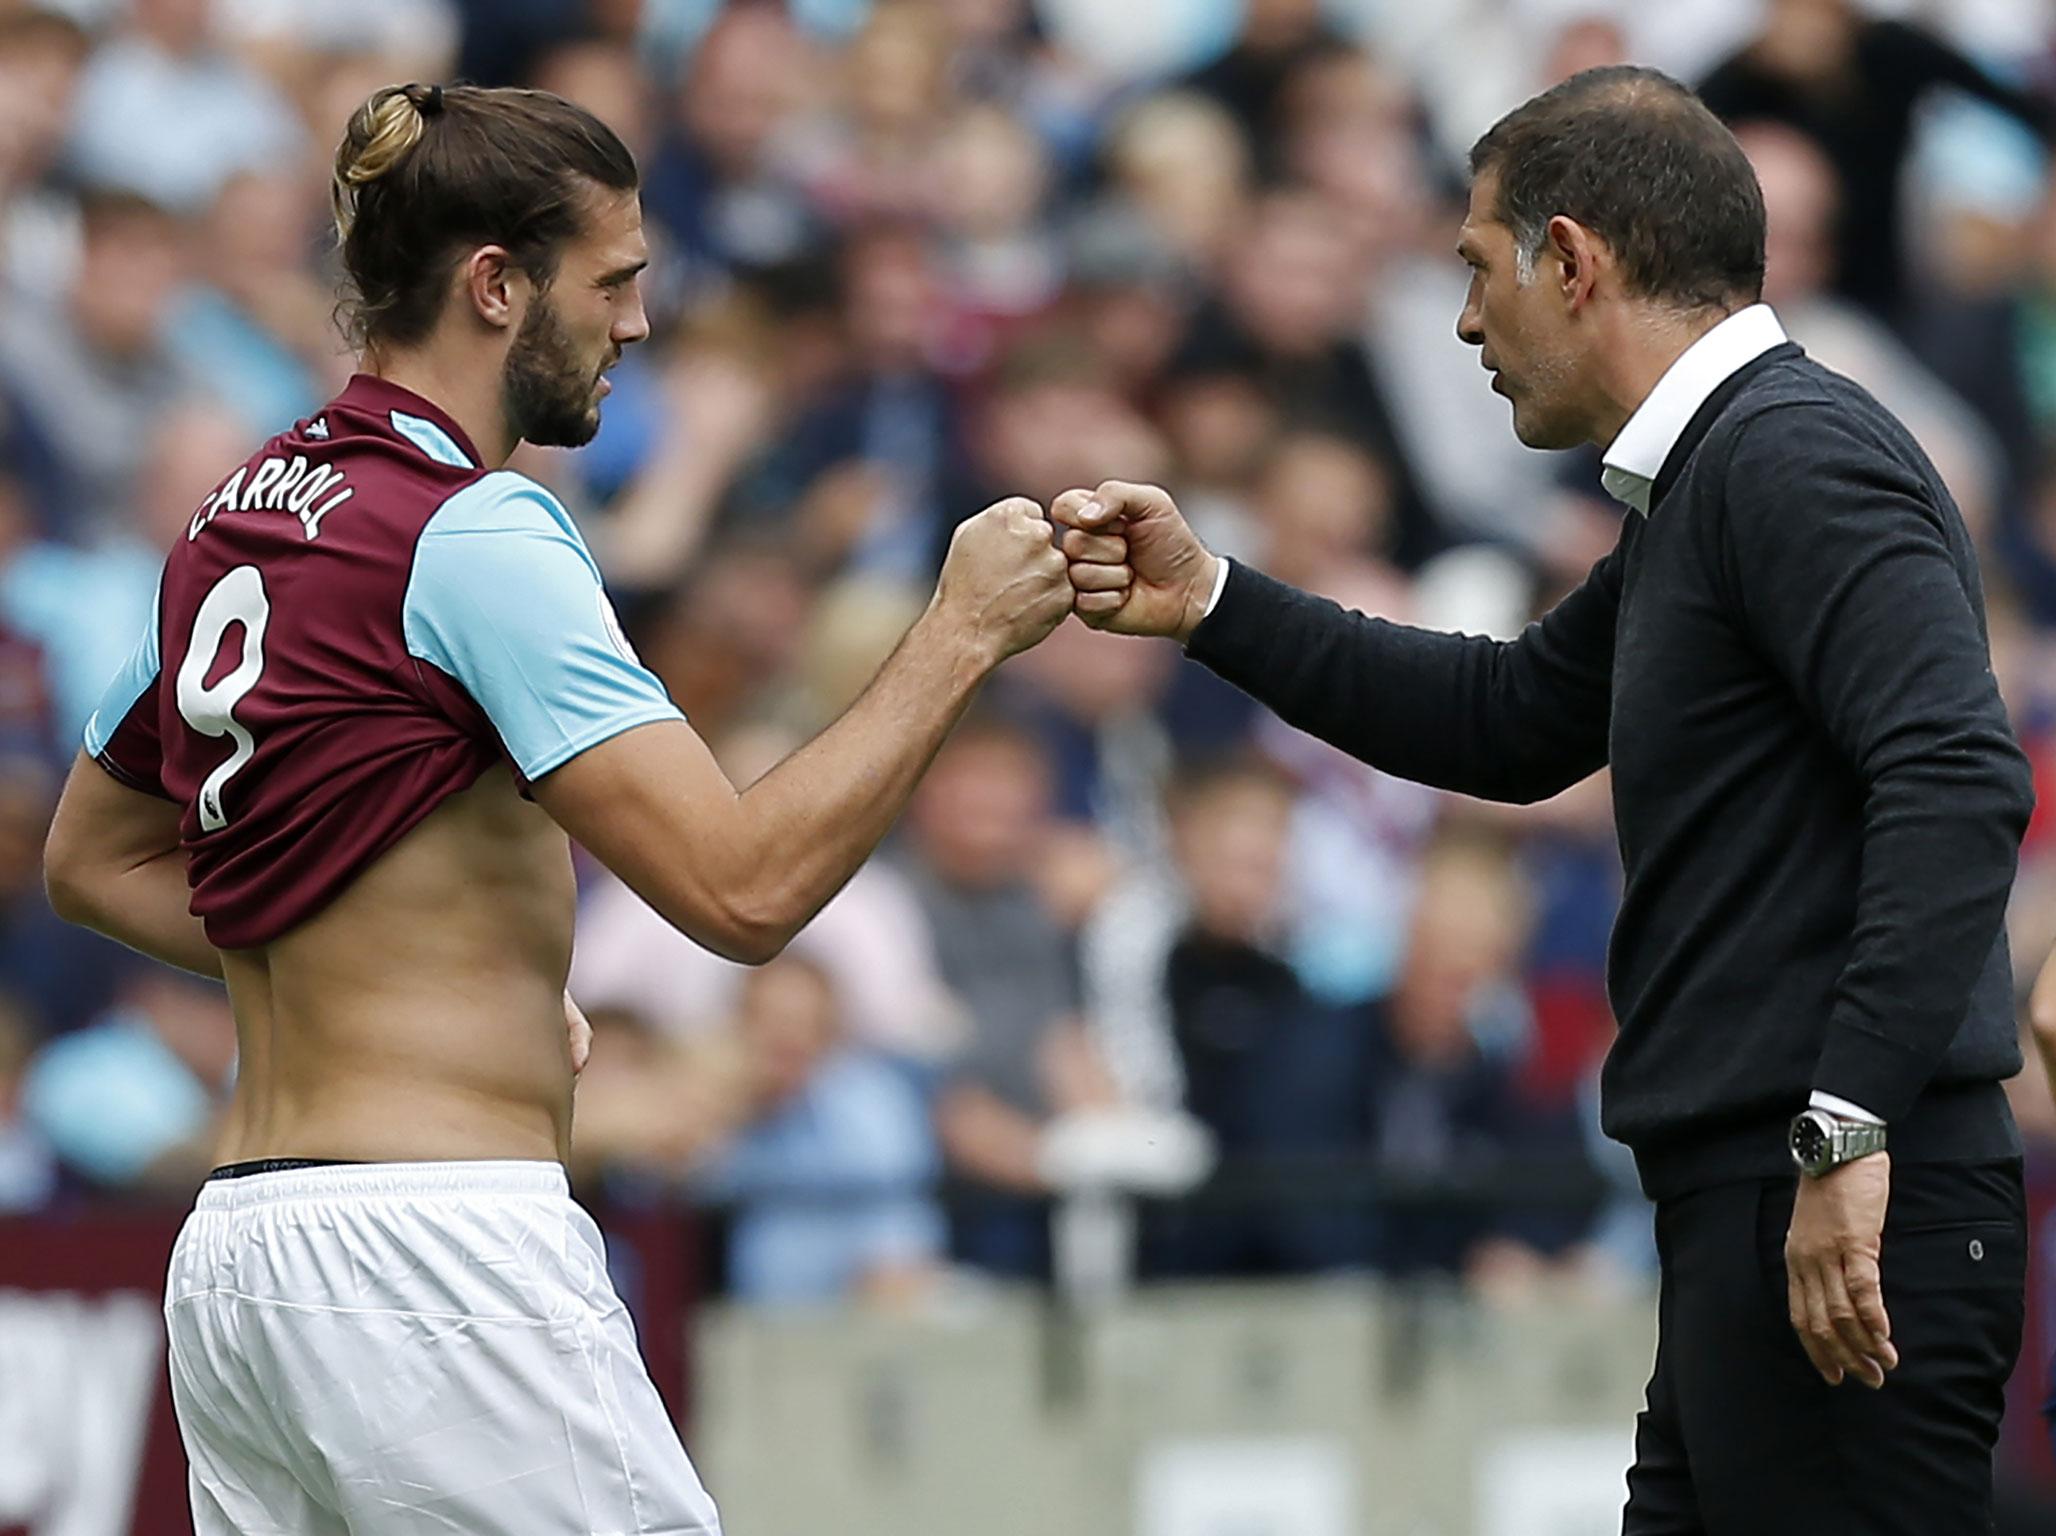 &#13;
Slaven Bilic brought on Carroll after Antonio picked up an injury &#13;